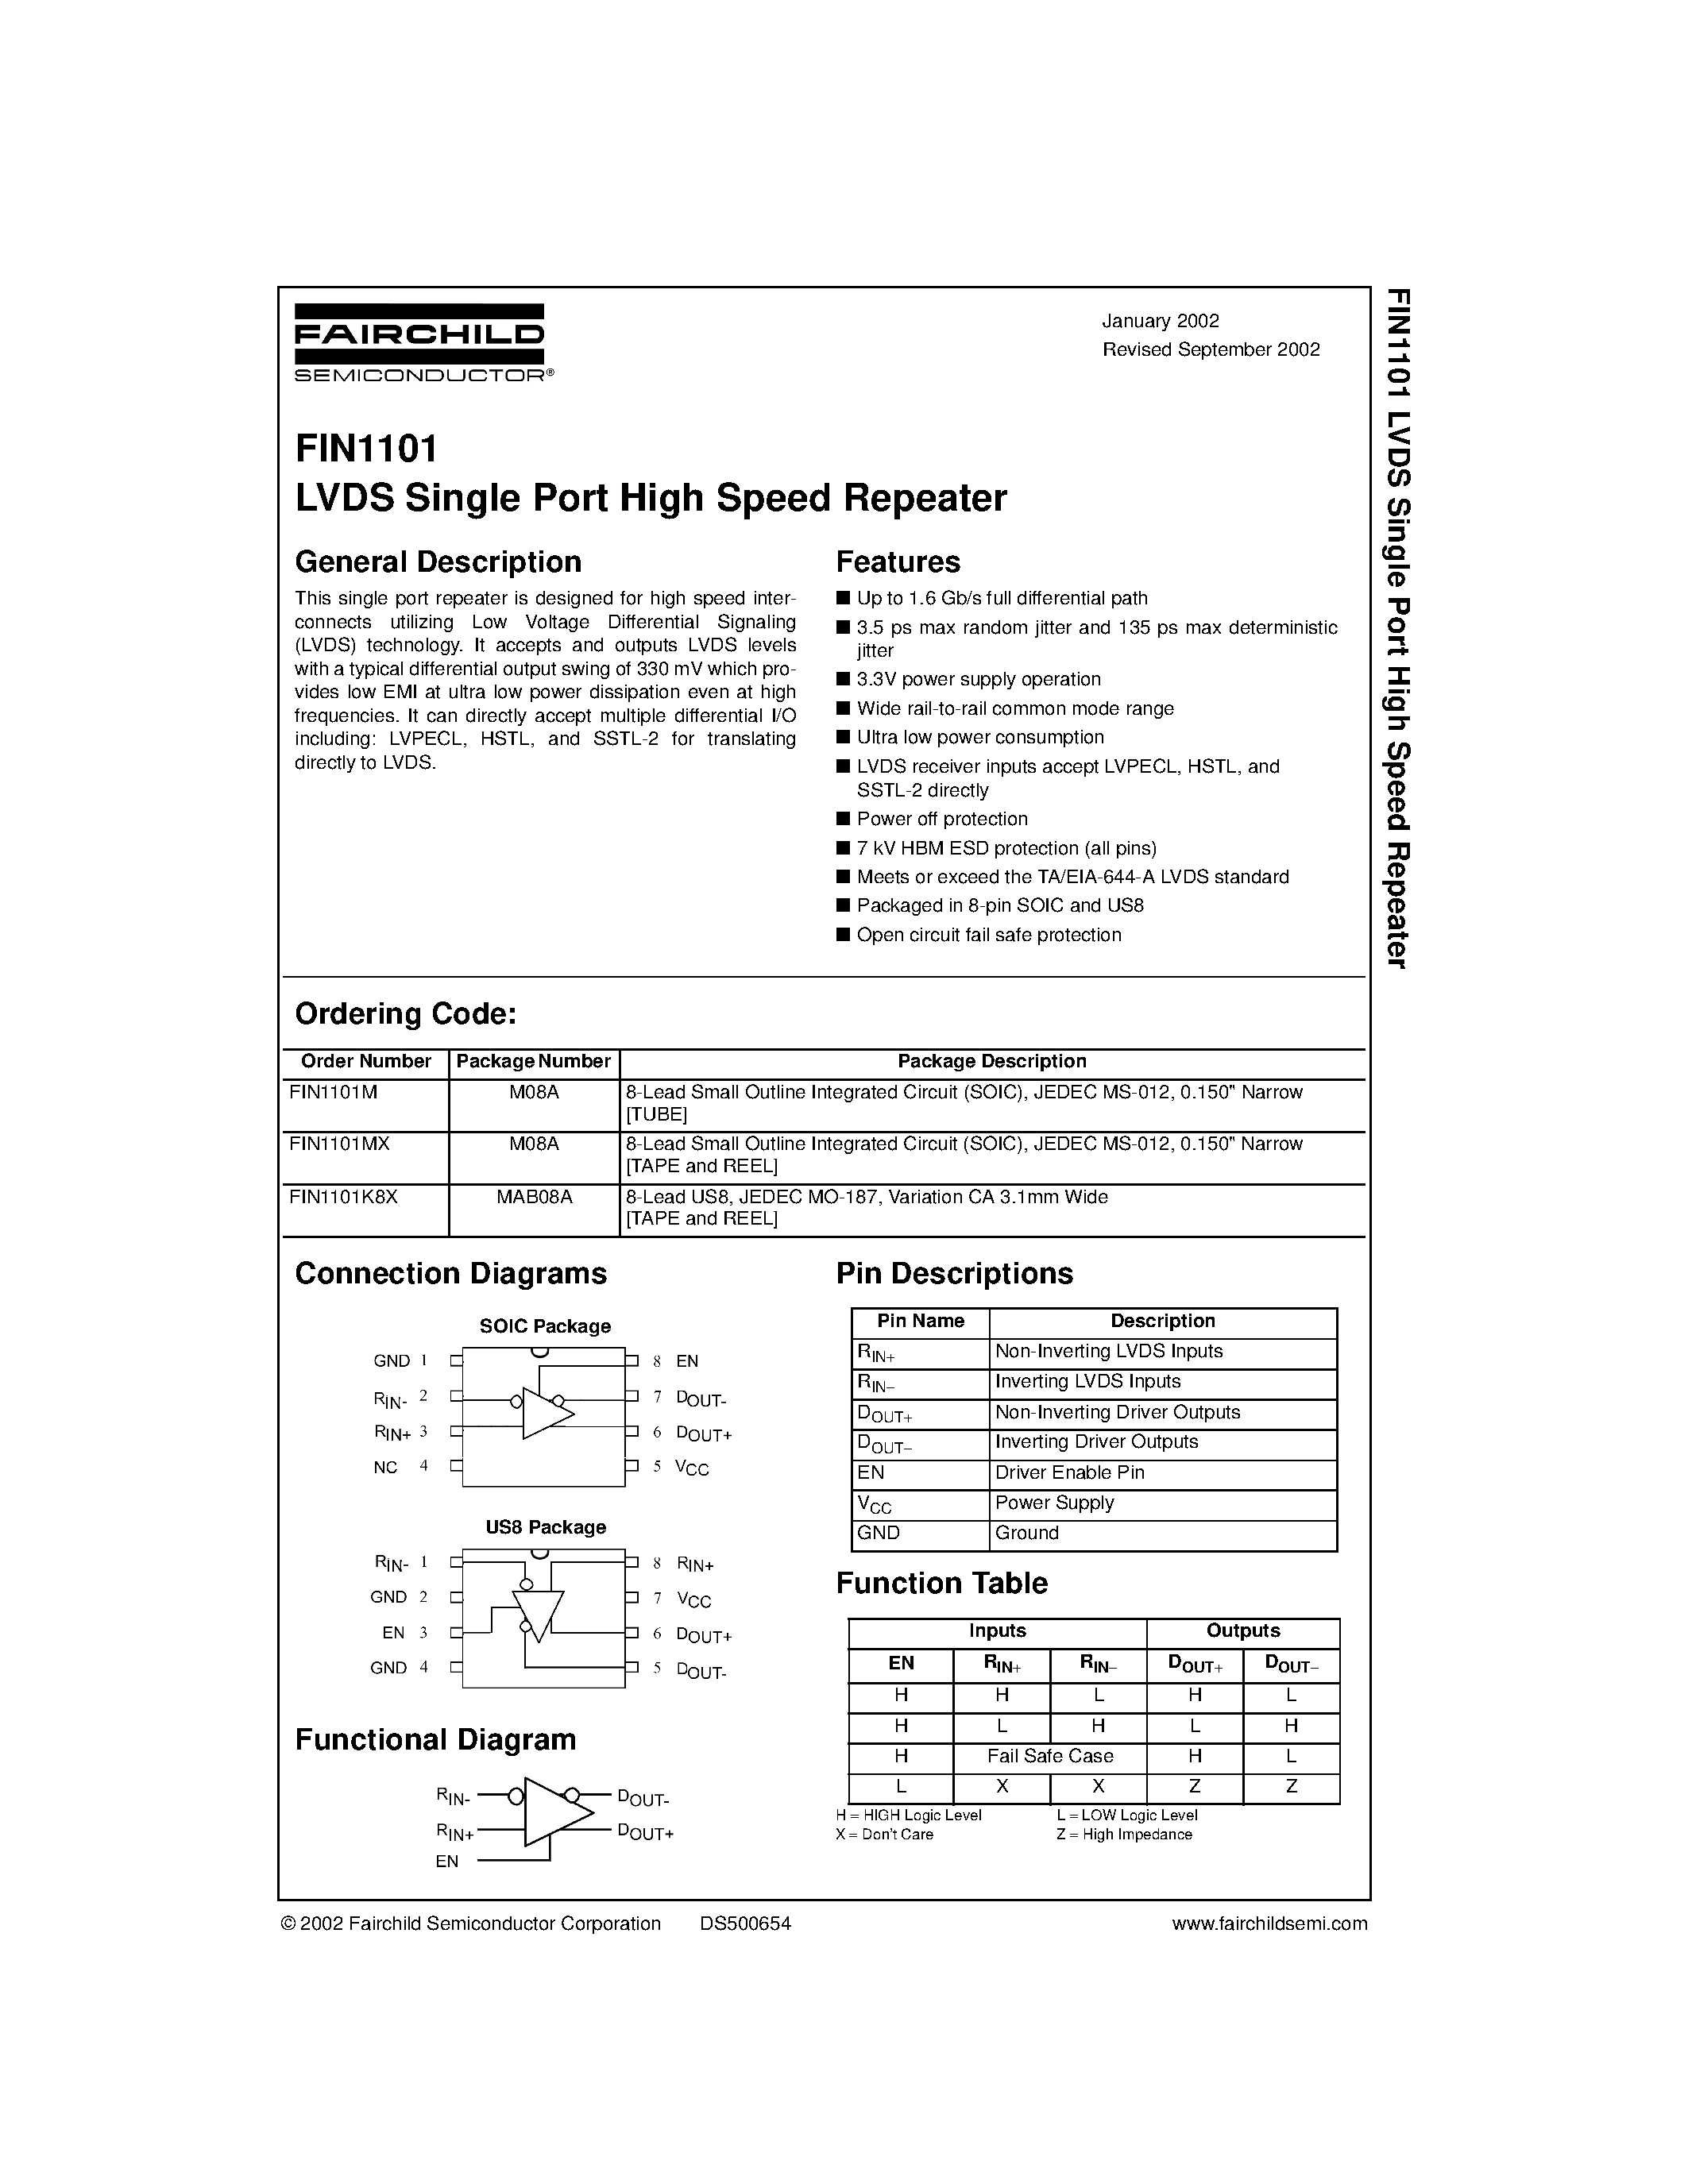 Datasheet FIN1101MX - LVDS Single Port High Speed Repeater page 1